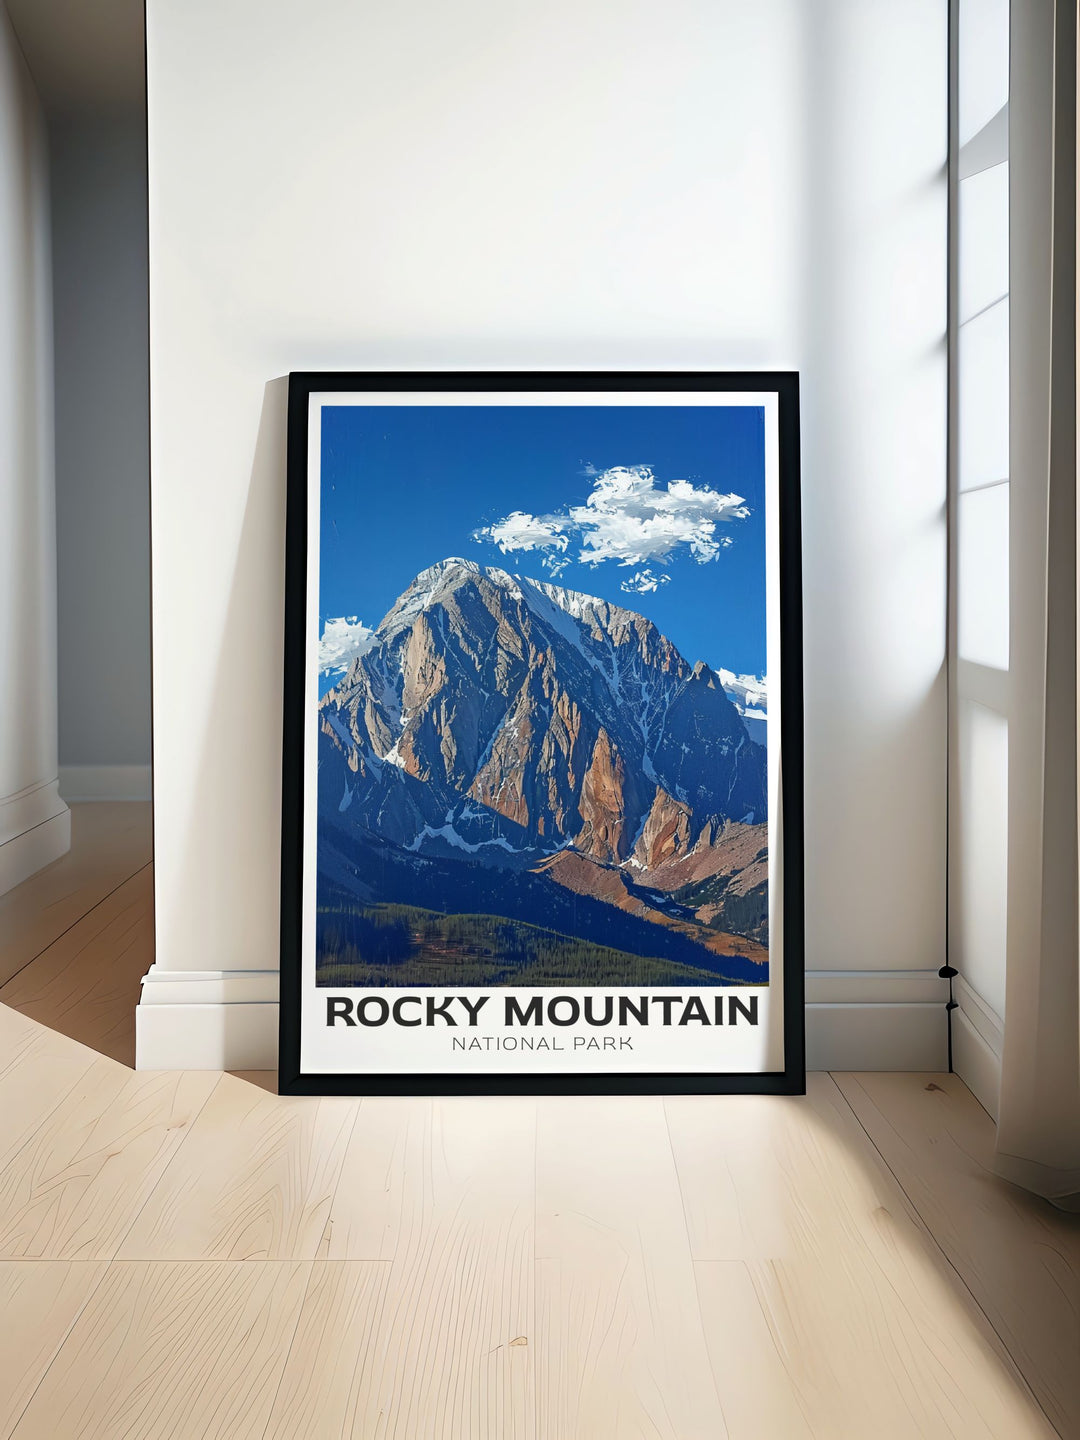 Framed print of Long Peak in the Colorado Rockies showcasing the majestic mountain and its serene surroundings perfect for home decor or as a special gift for nature enthusiasts and hikers